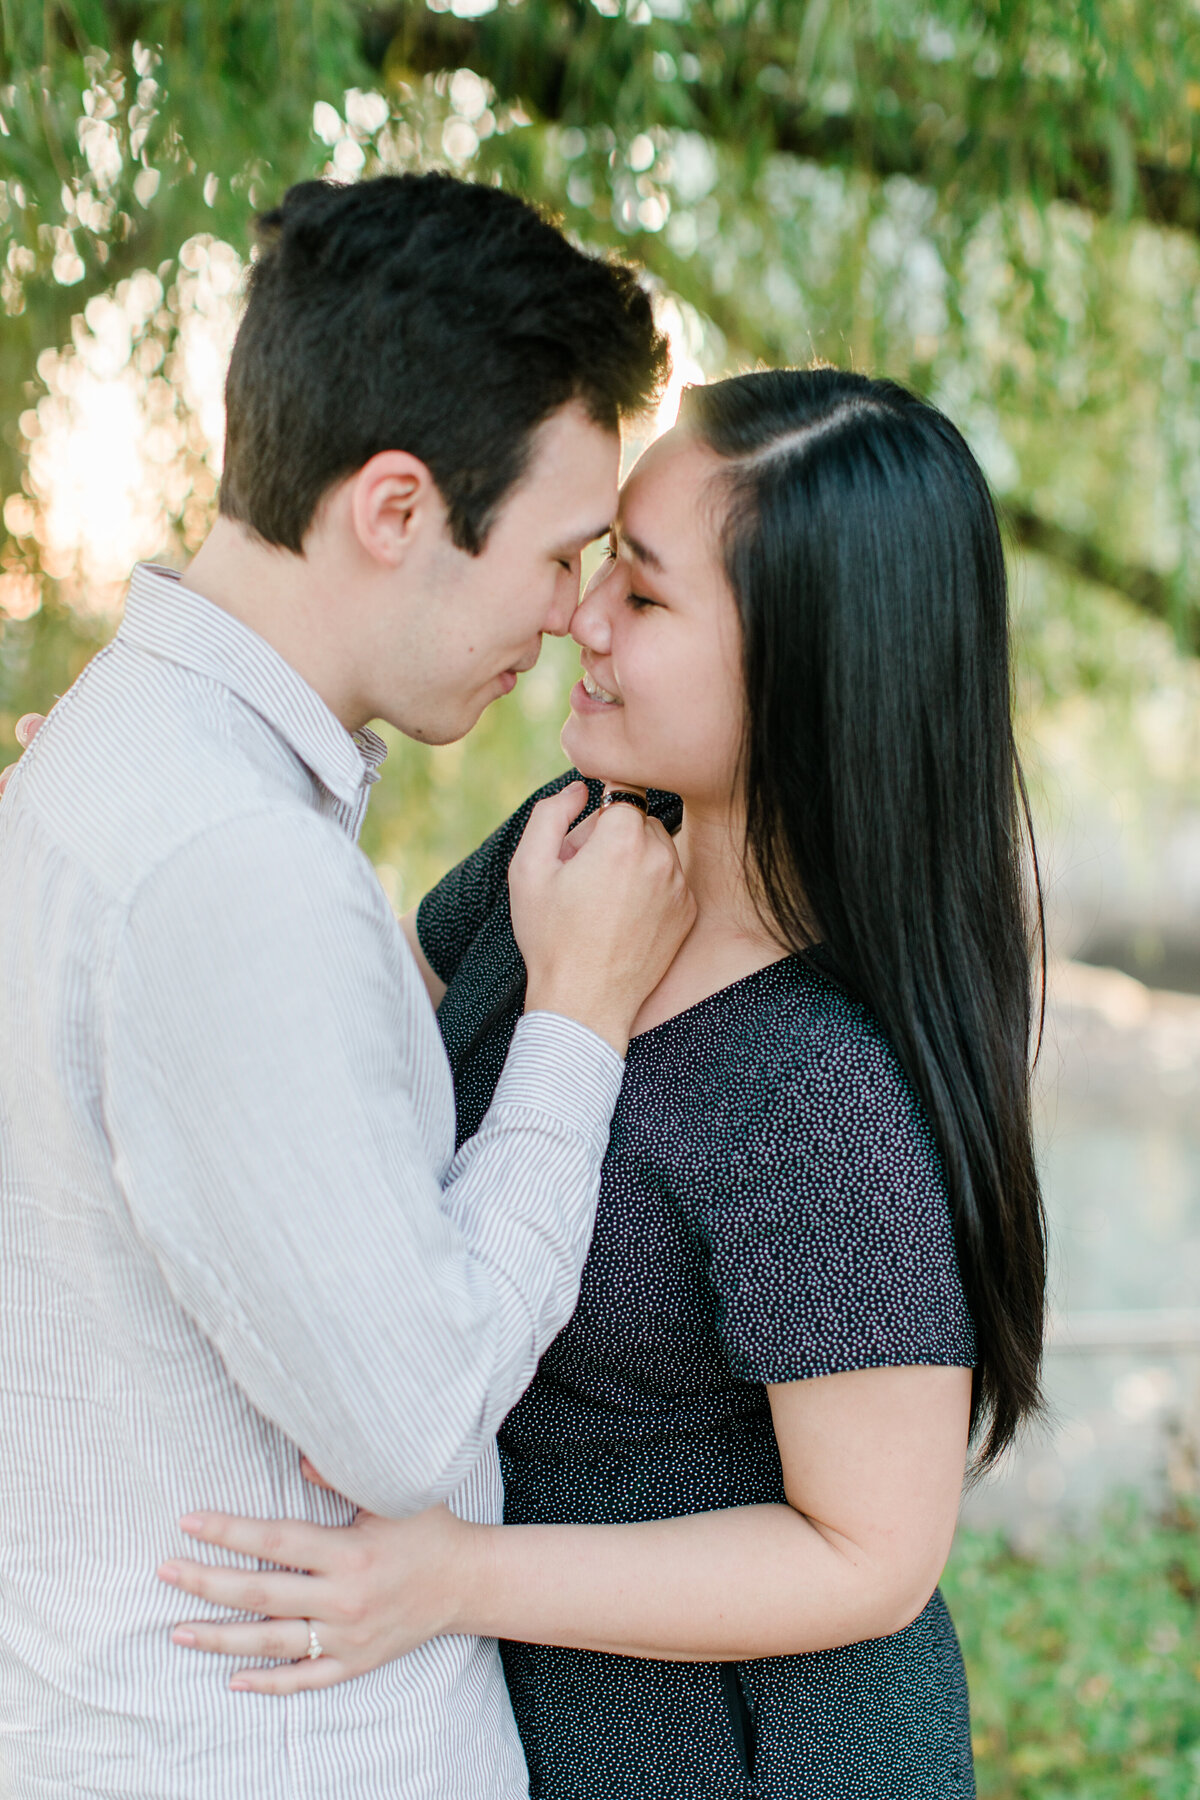 Becky_Collin_Navy_Yards_Park_The_Wharf_Washington_DC_Fall_Engagement_Session_AngelikaJohnsPhotography-7862